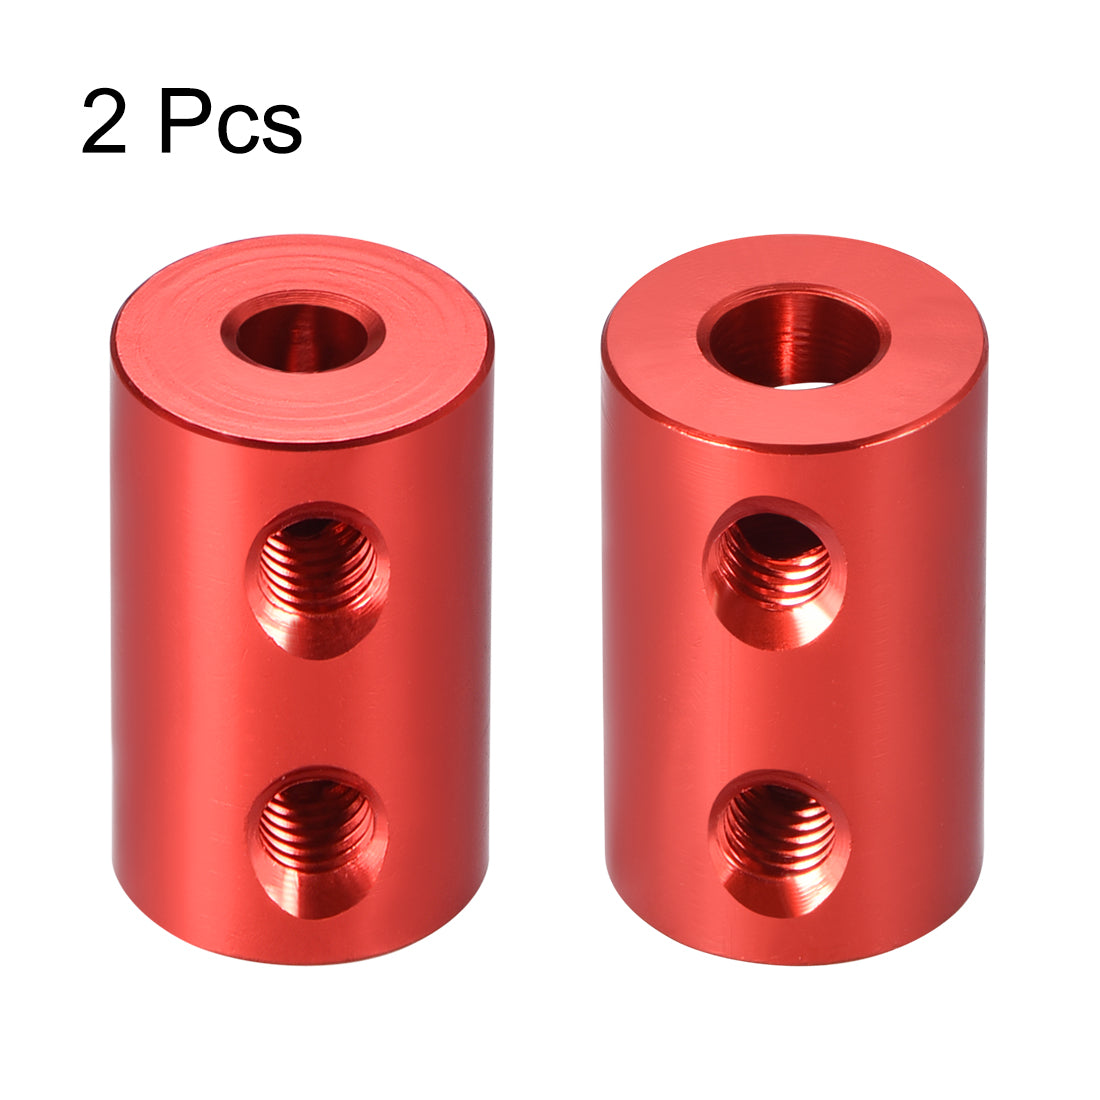 uxcell Uxcell Shaft Coupling 4mm to 5mm Bore L20xD12 Robot Motor Wheel Rigid Coupler Connector Red 2 PCS